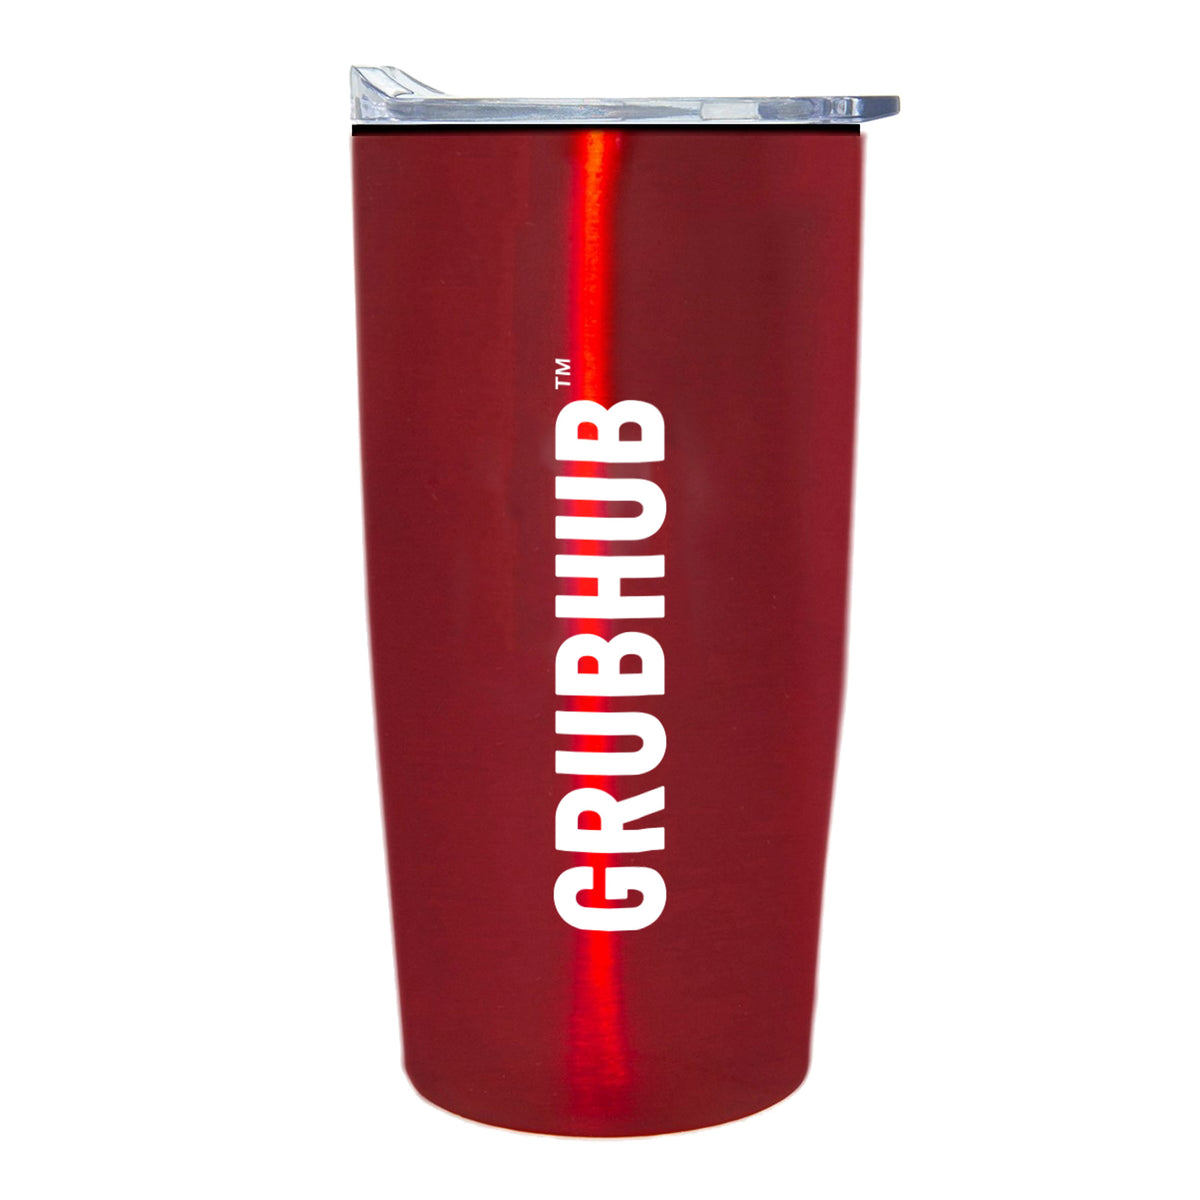 Straight Tumbler w/ Plastic Liner - 20 oz., Holiday Greetings Gift Set, White Chocolate Pretzels w/ Crushed Peppermint